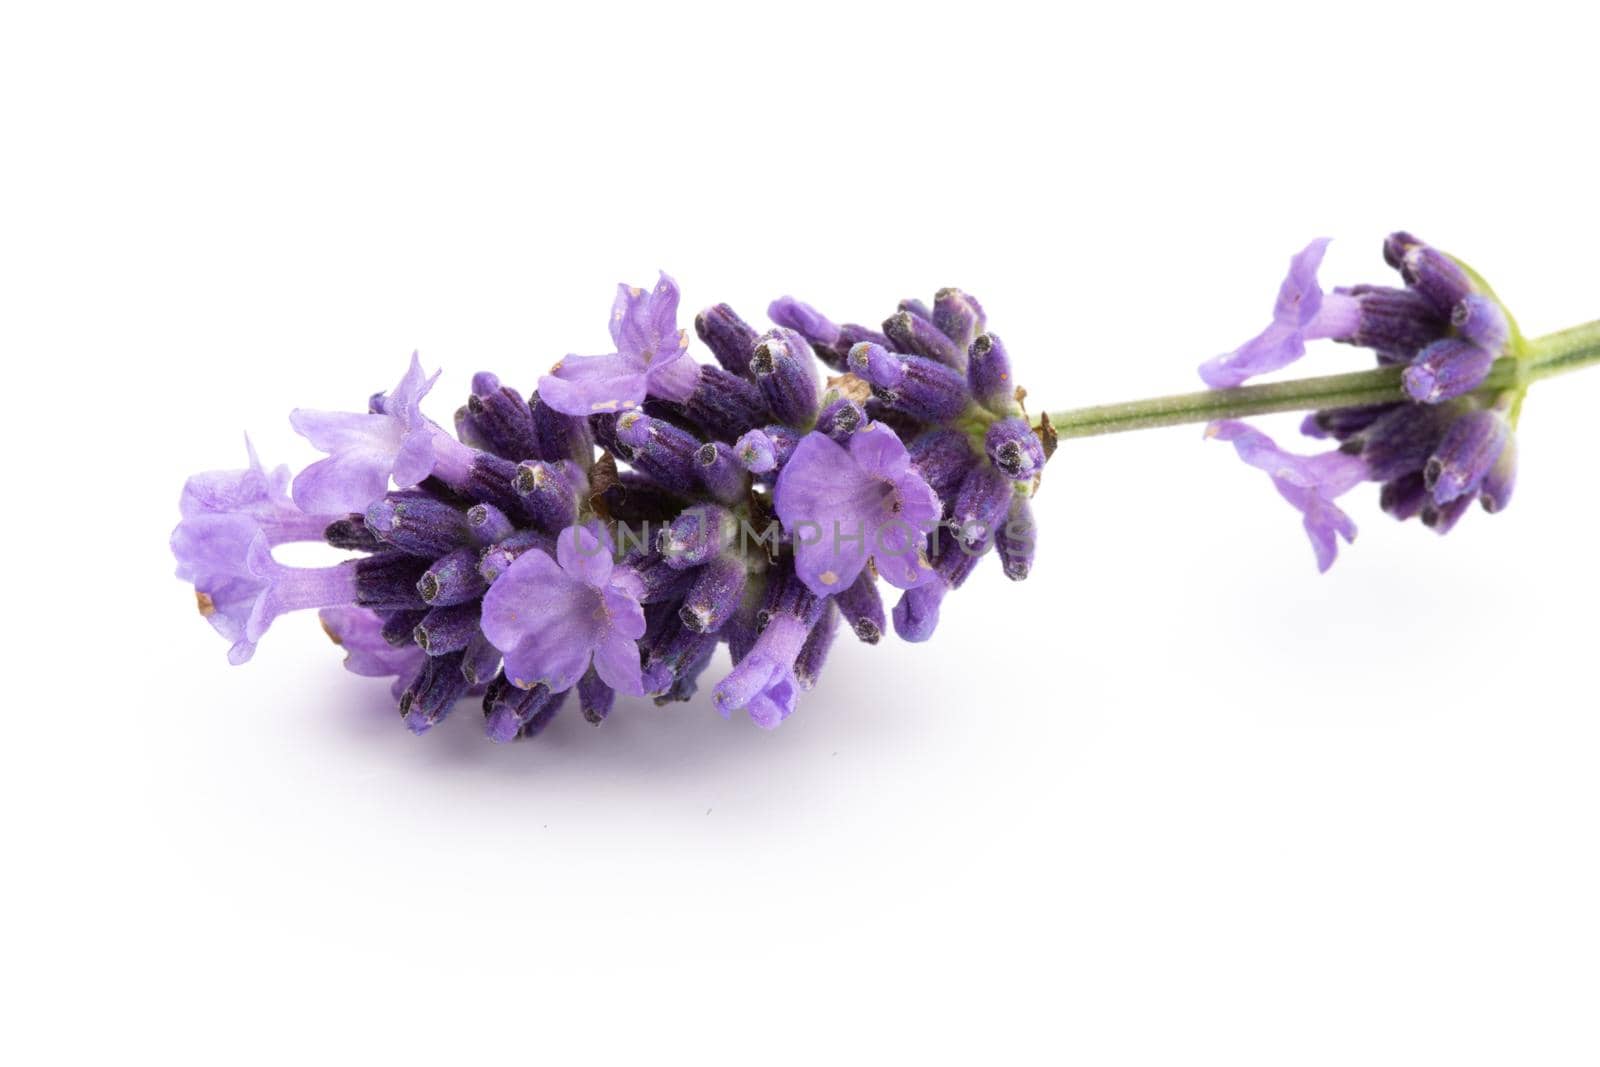 Lavender flowers on a white background. by gitusik